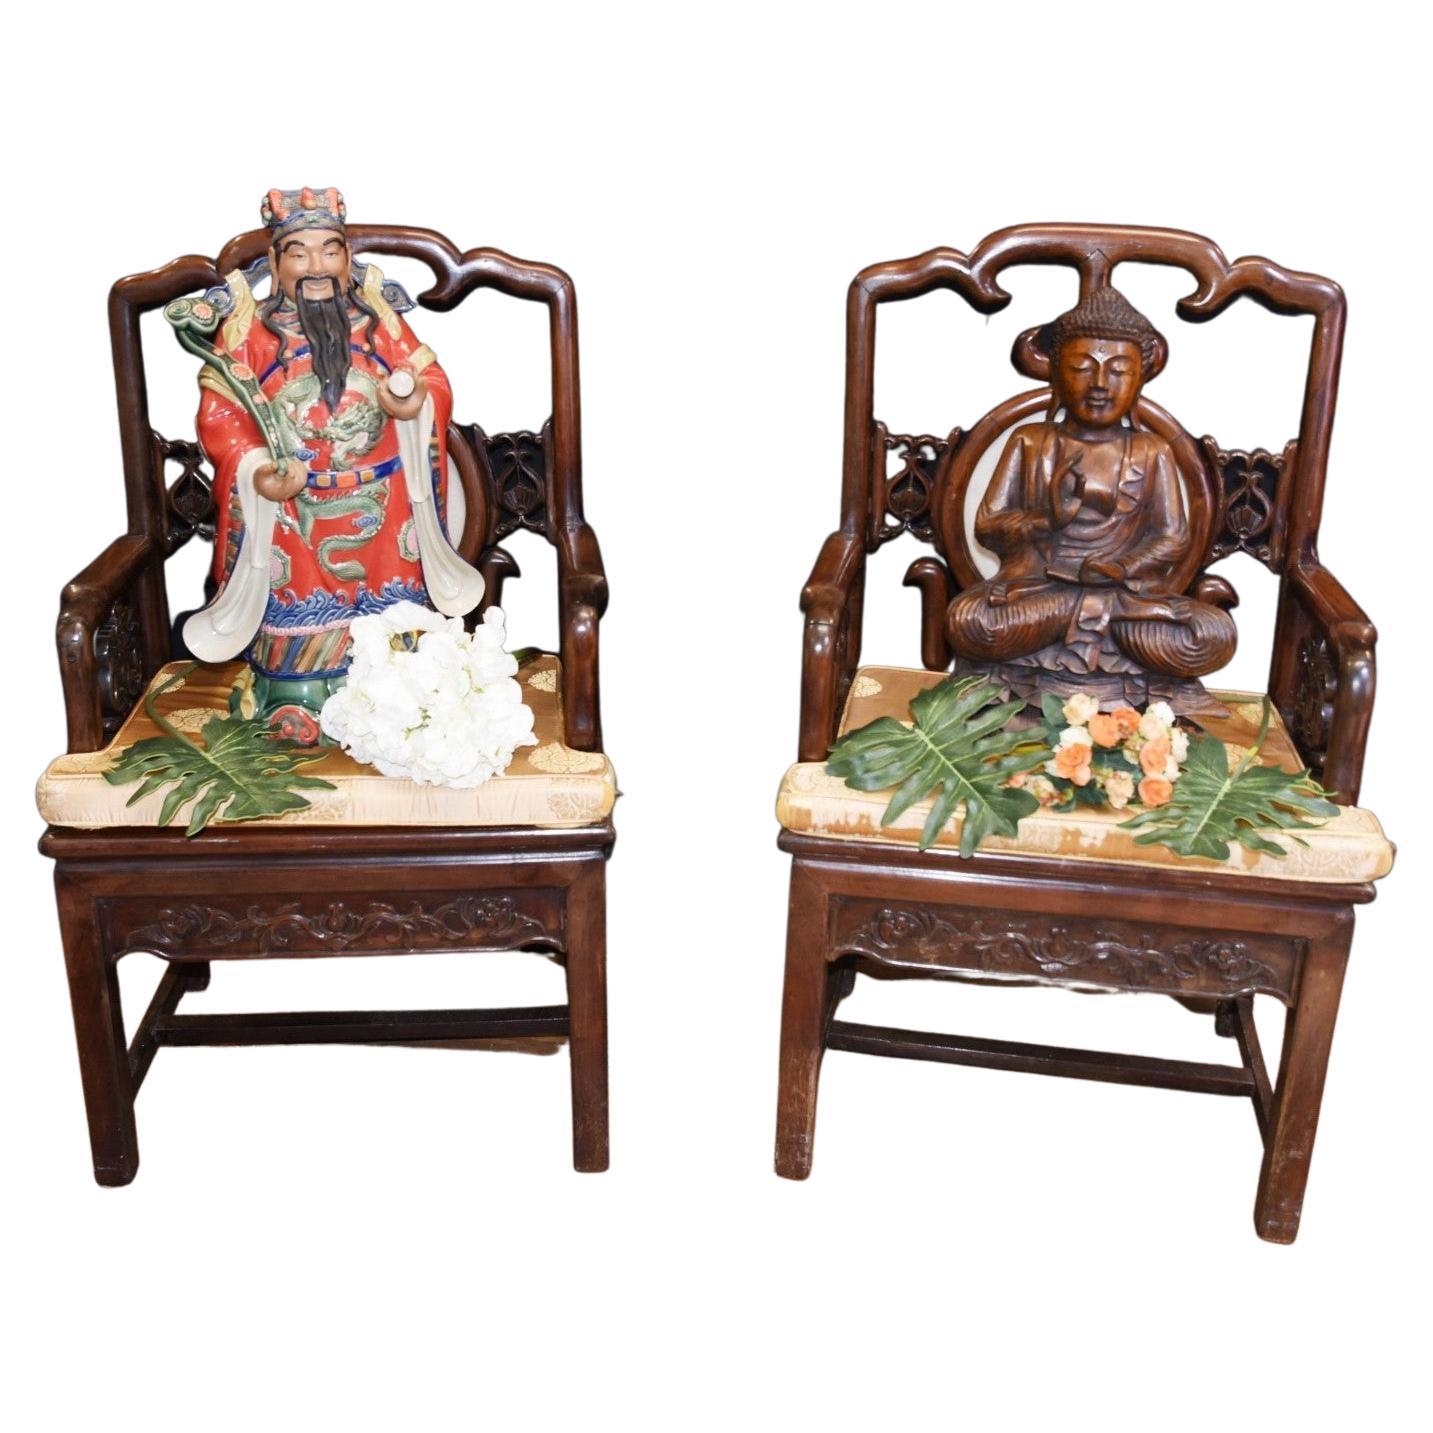 Pair of Antique Chinese Armchairs Hardwood Seat Chairs For Sale